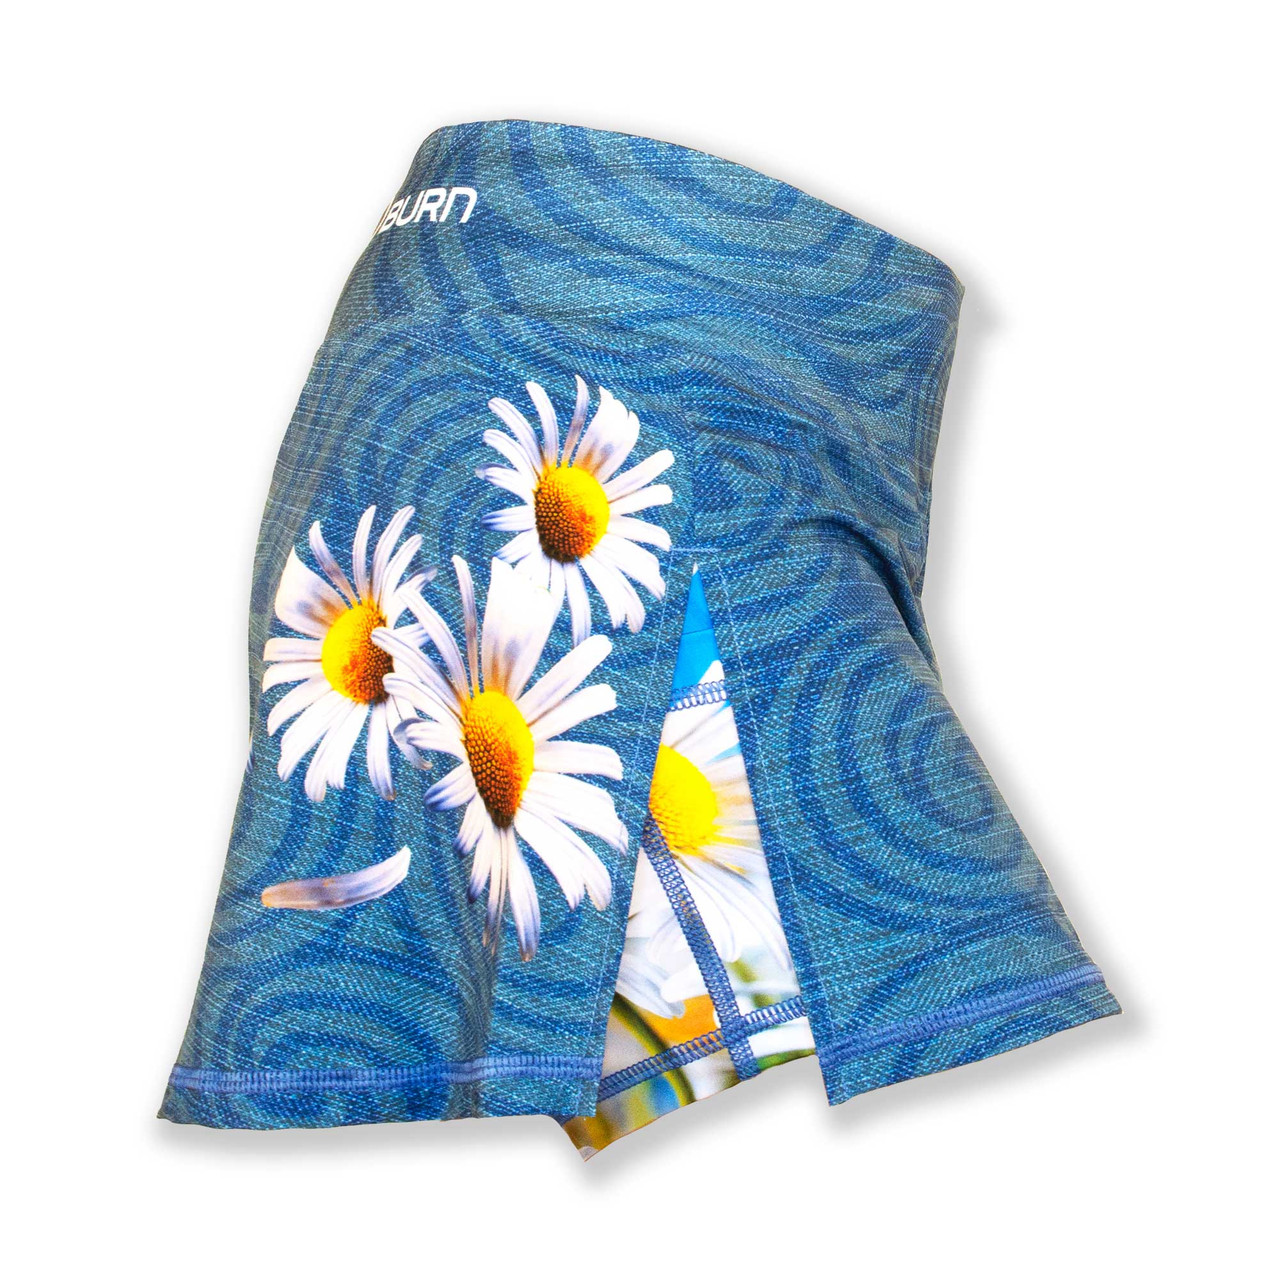 https://cdn11.bigcommerce.com/s-0hcext9/images/stencil/1280x1280/products/2103/14483/W-Daisy-Sports-Skirt-Side__10134.1623445880.jpg?c=2